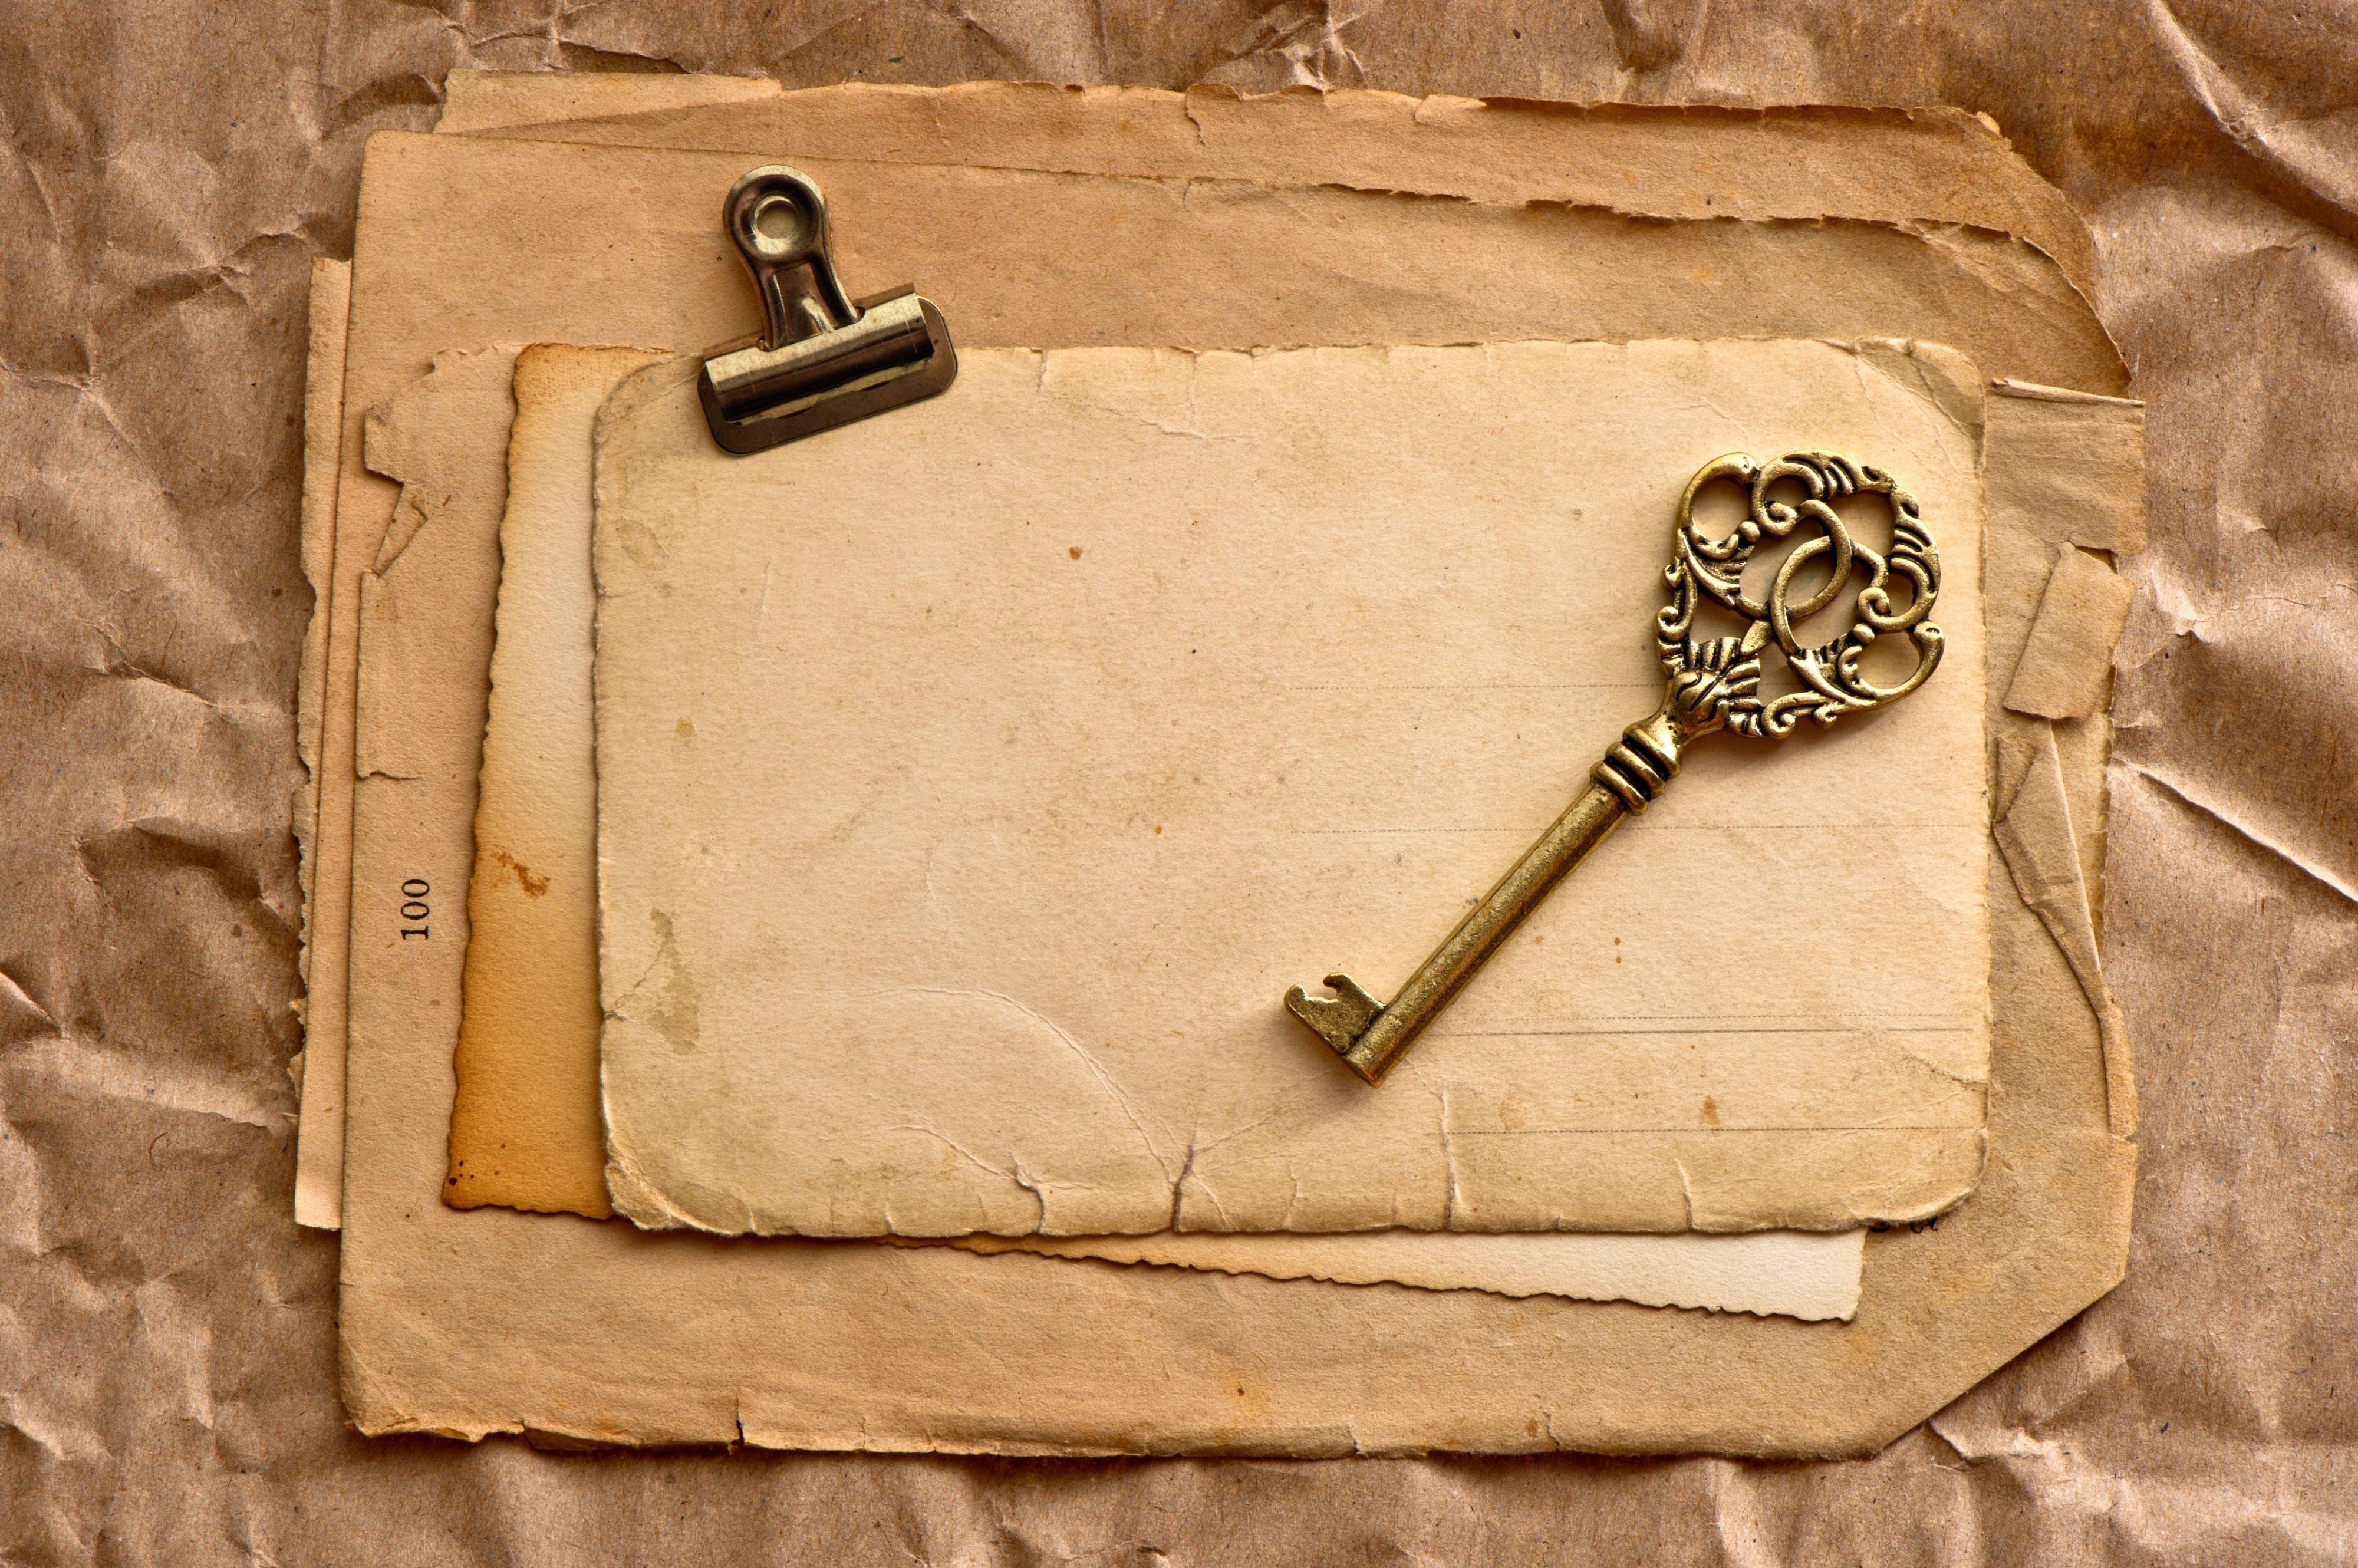 Vintage Papers And Key Image Background